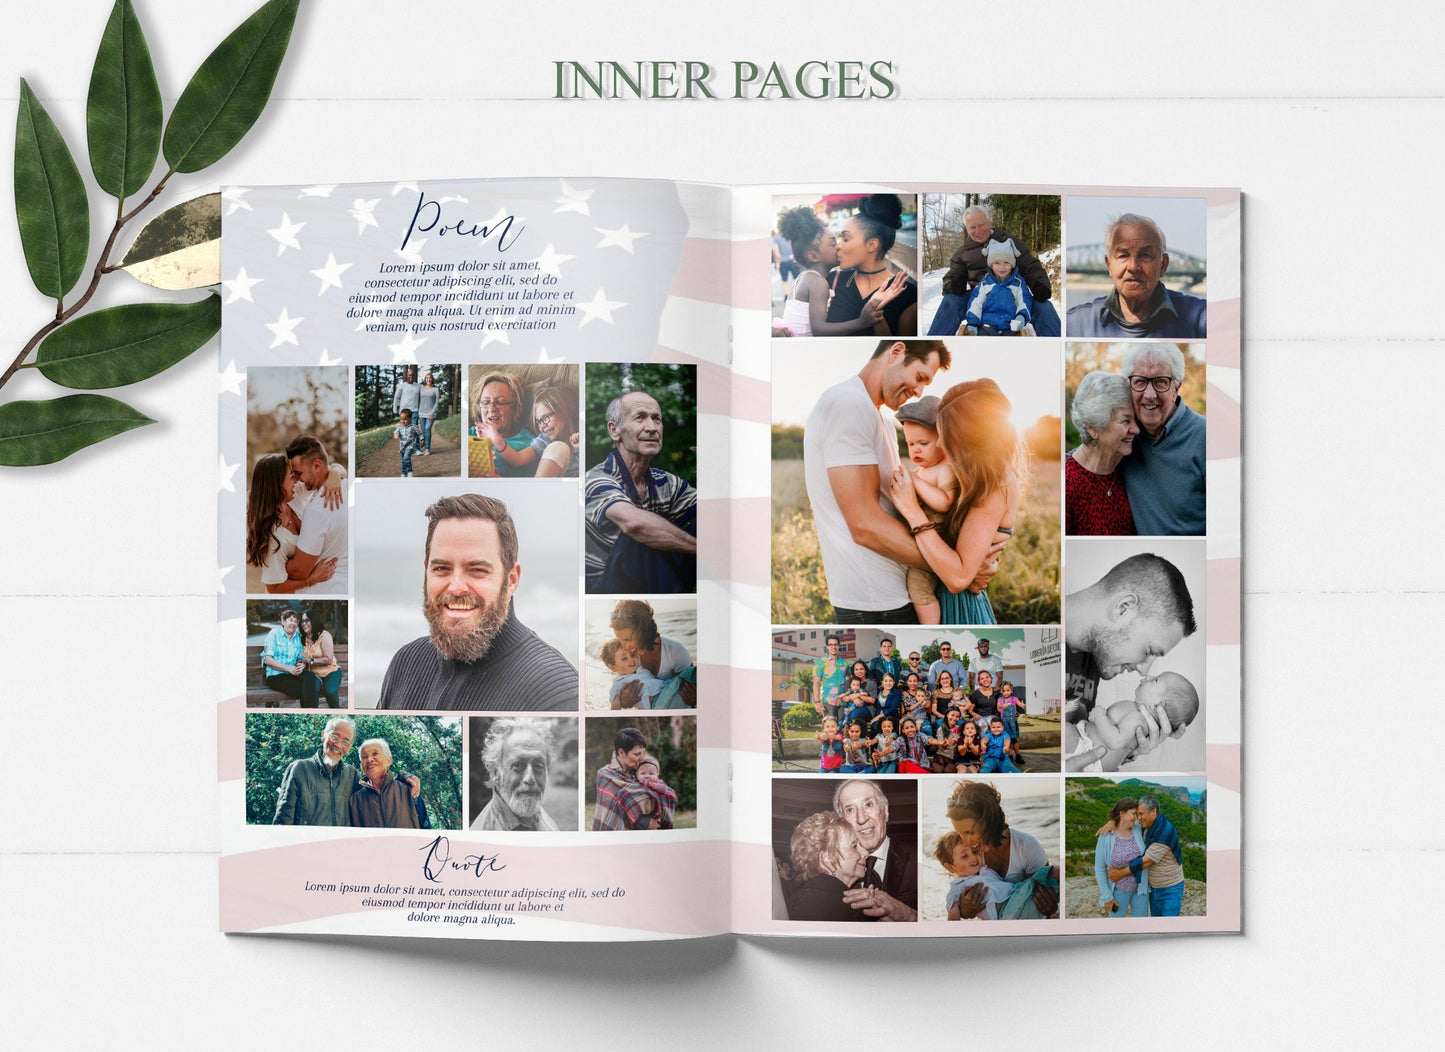 American Flag Funeral Program Template - 8 Page